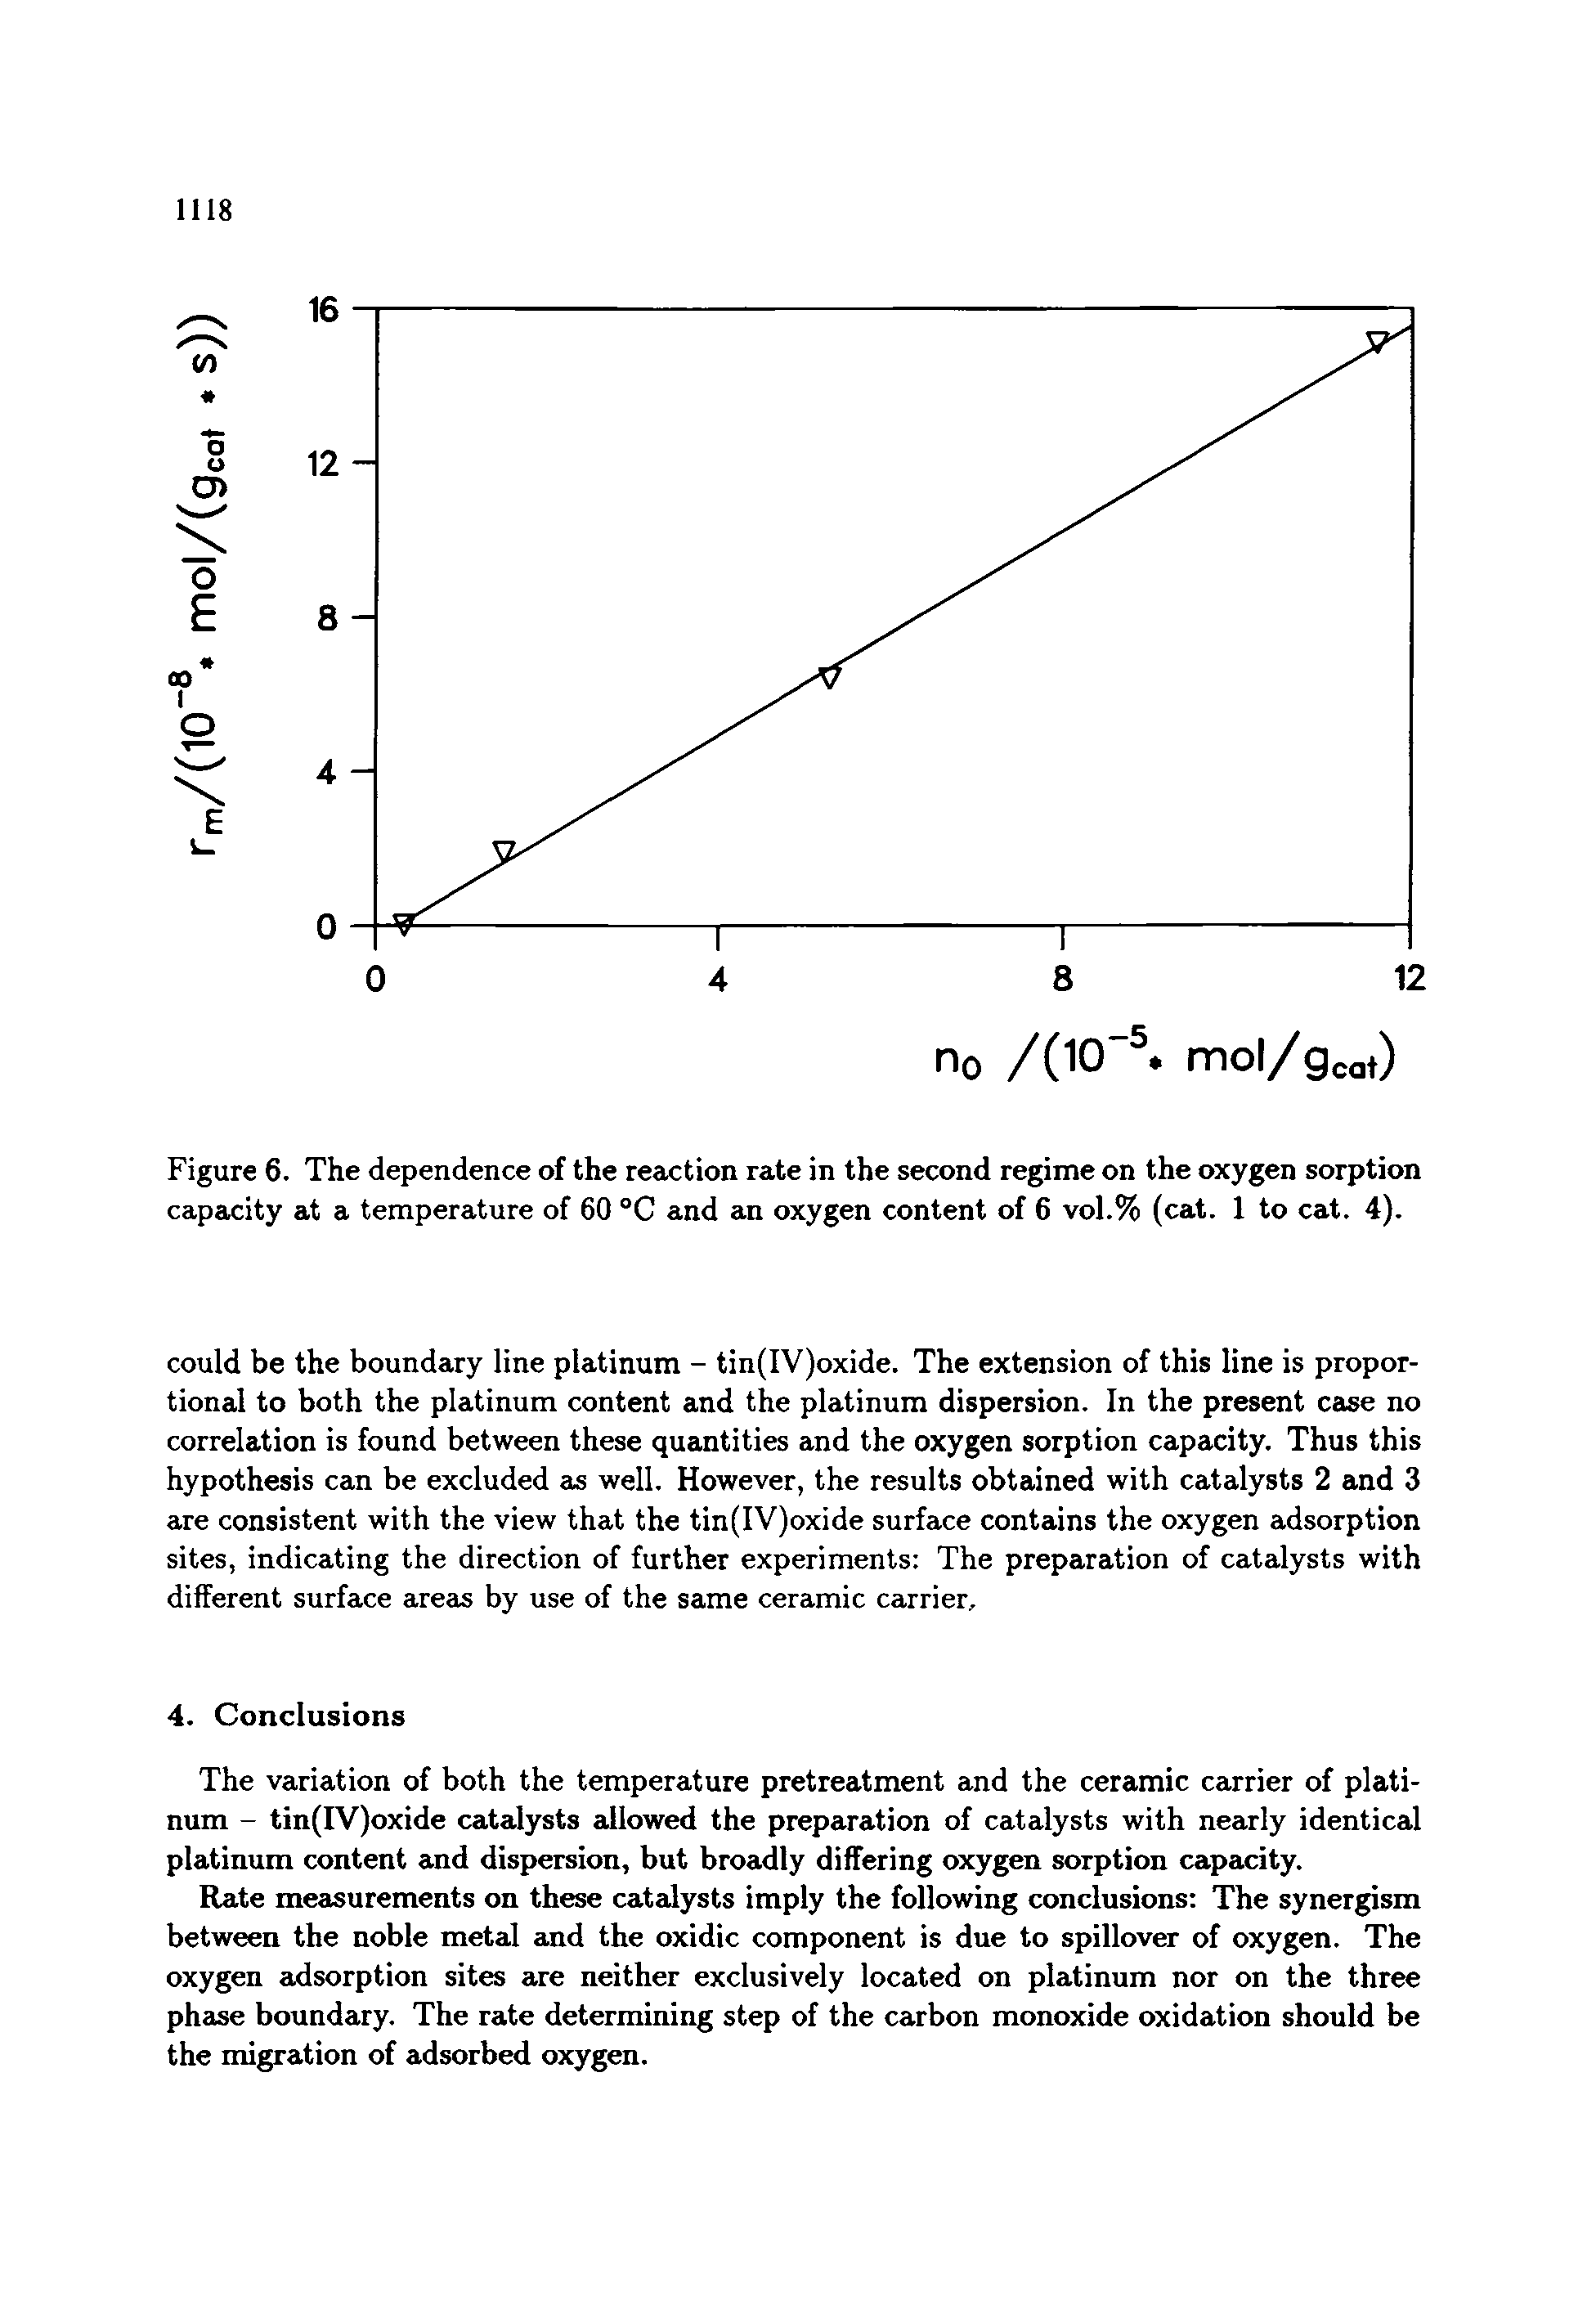 Figure 6. The dependence of the reaction rate in the second regime on the oxygen sorption capacity at a temperature of 60 °C and an oxygen content of 6 vol.% (cat. 1 to cat. 4).